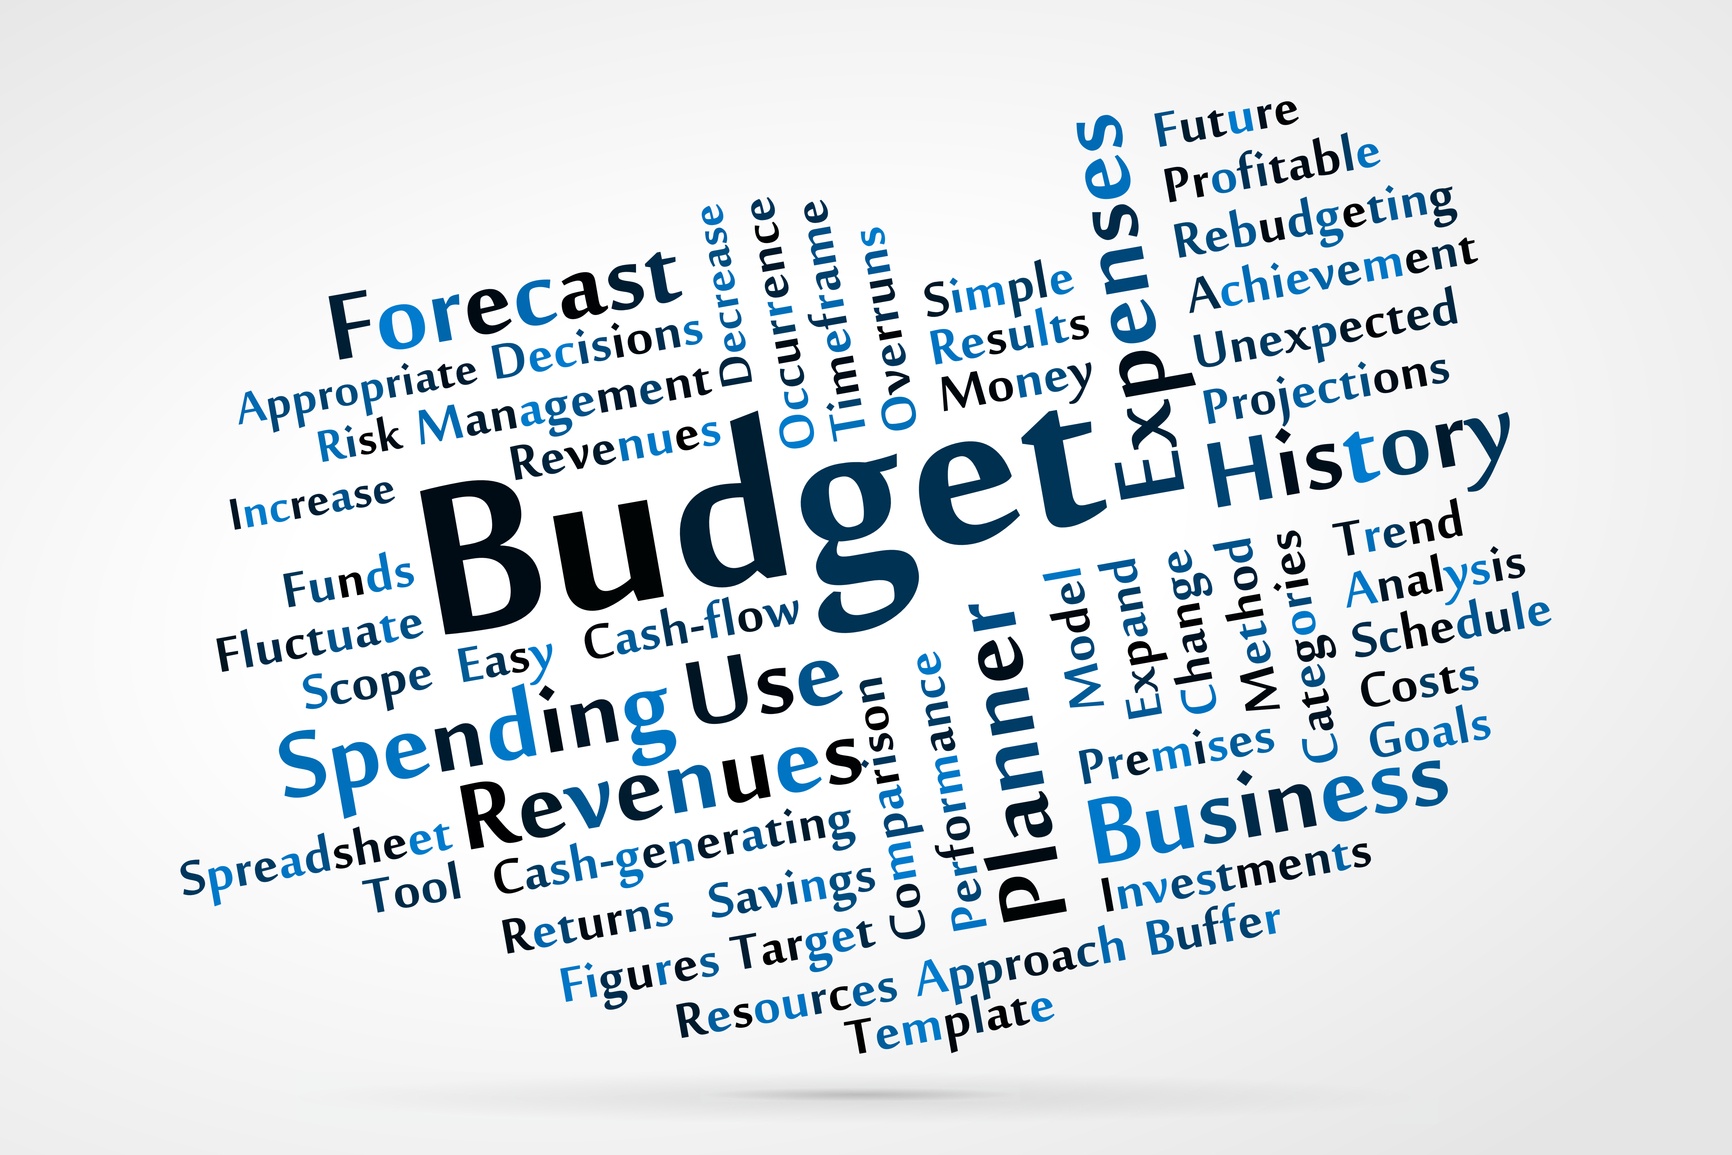 It’s Budgeting Season: Three Tips to Get Your Business Started